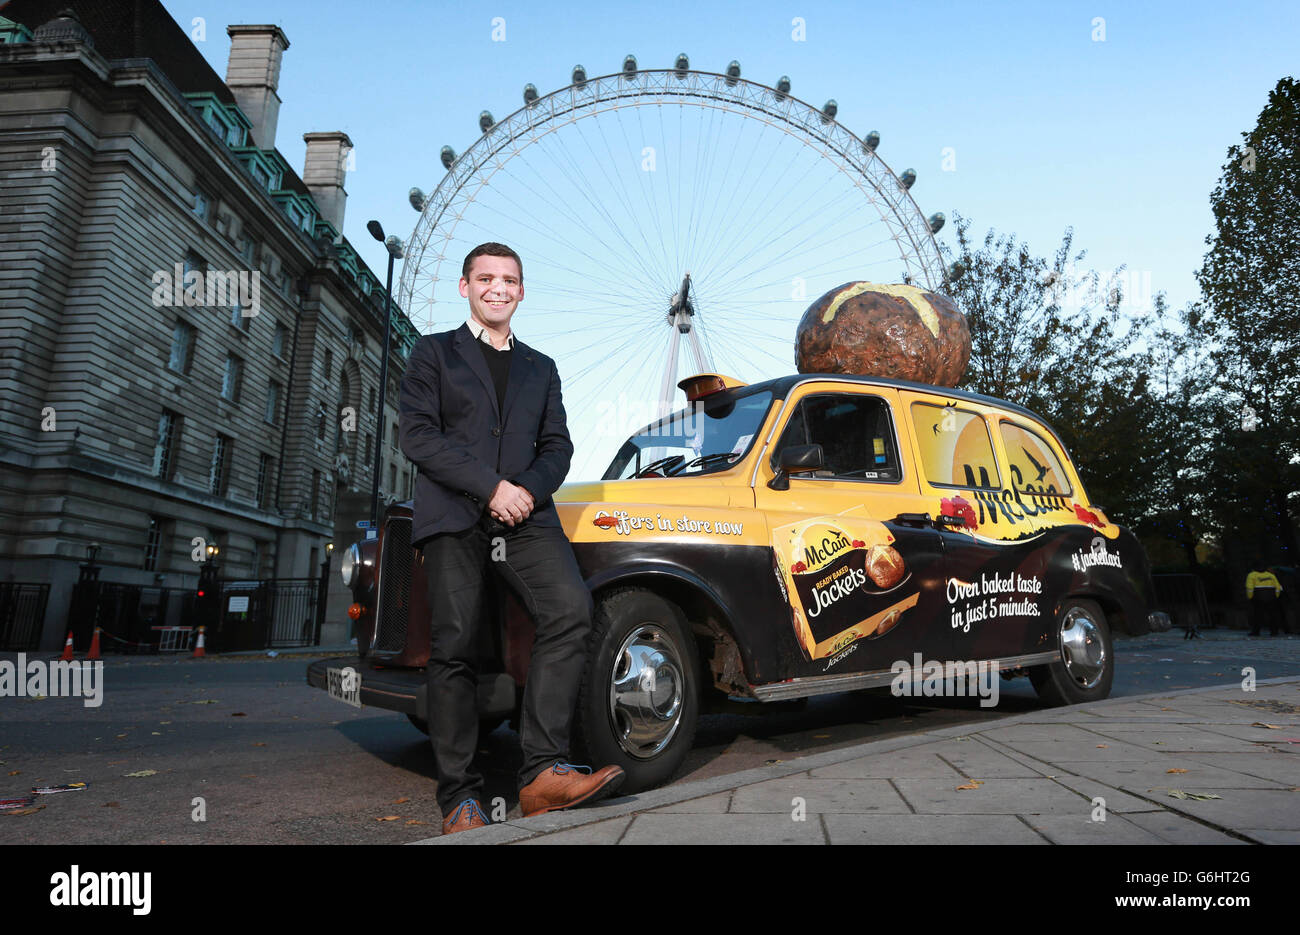 Mark Hodge, Marketing Director McCain GB, at the launch of the McCain Ready Baked Jacket Taxi, a specially modified taxi with built in potato cooking facilities, parked in front of the London Eye in London. Stock Photo